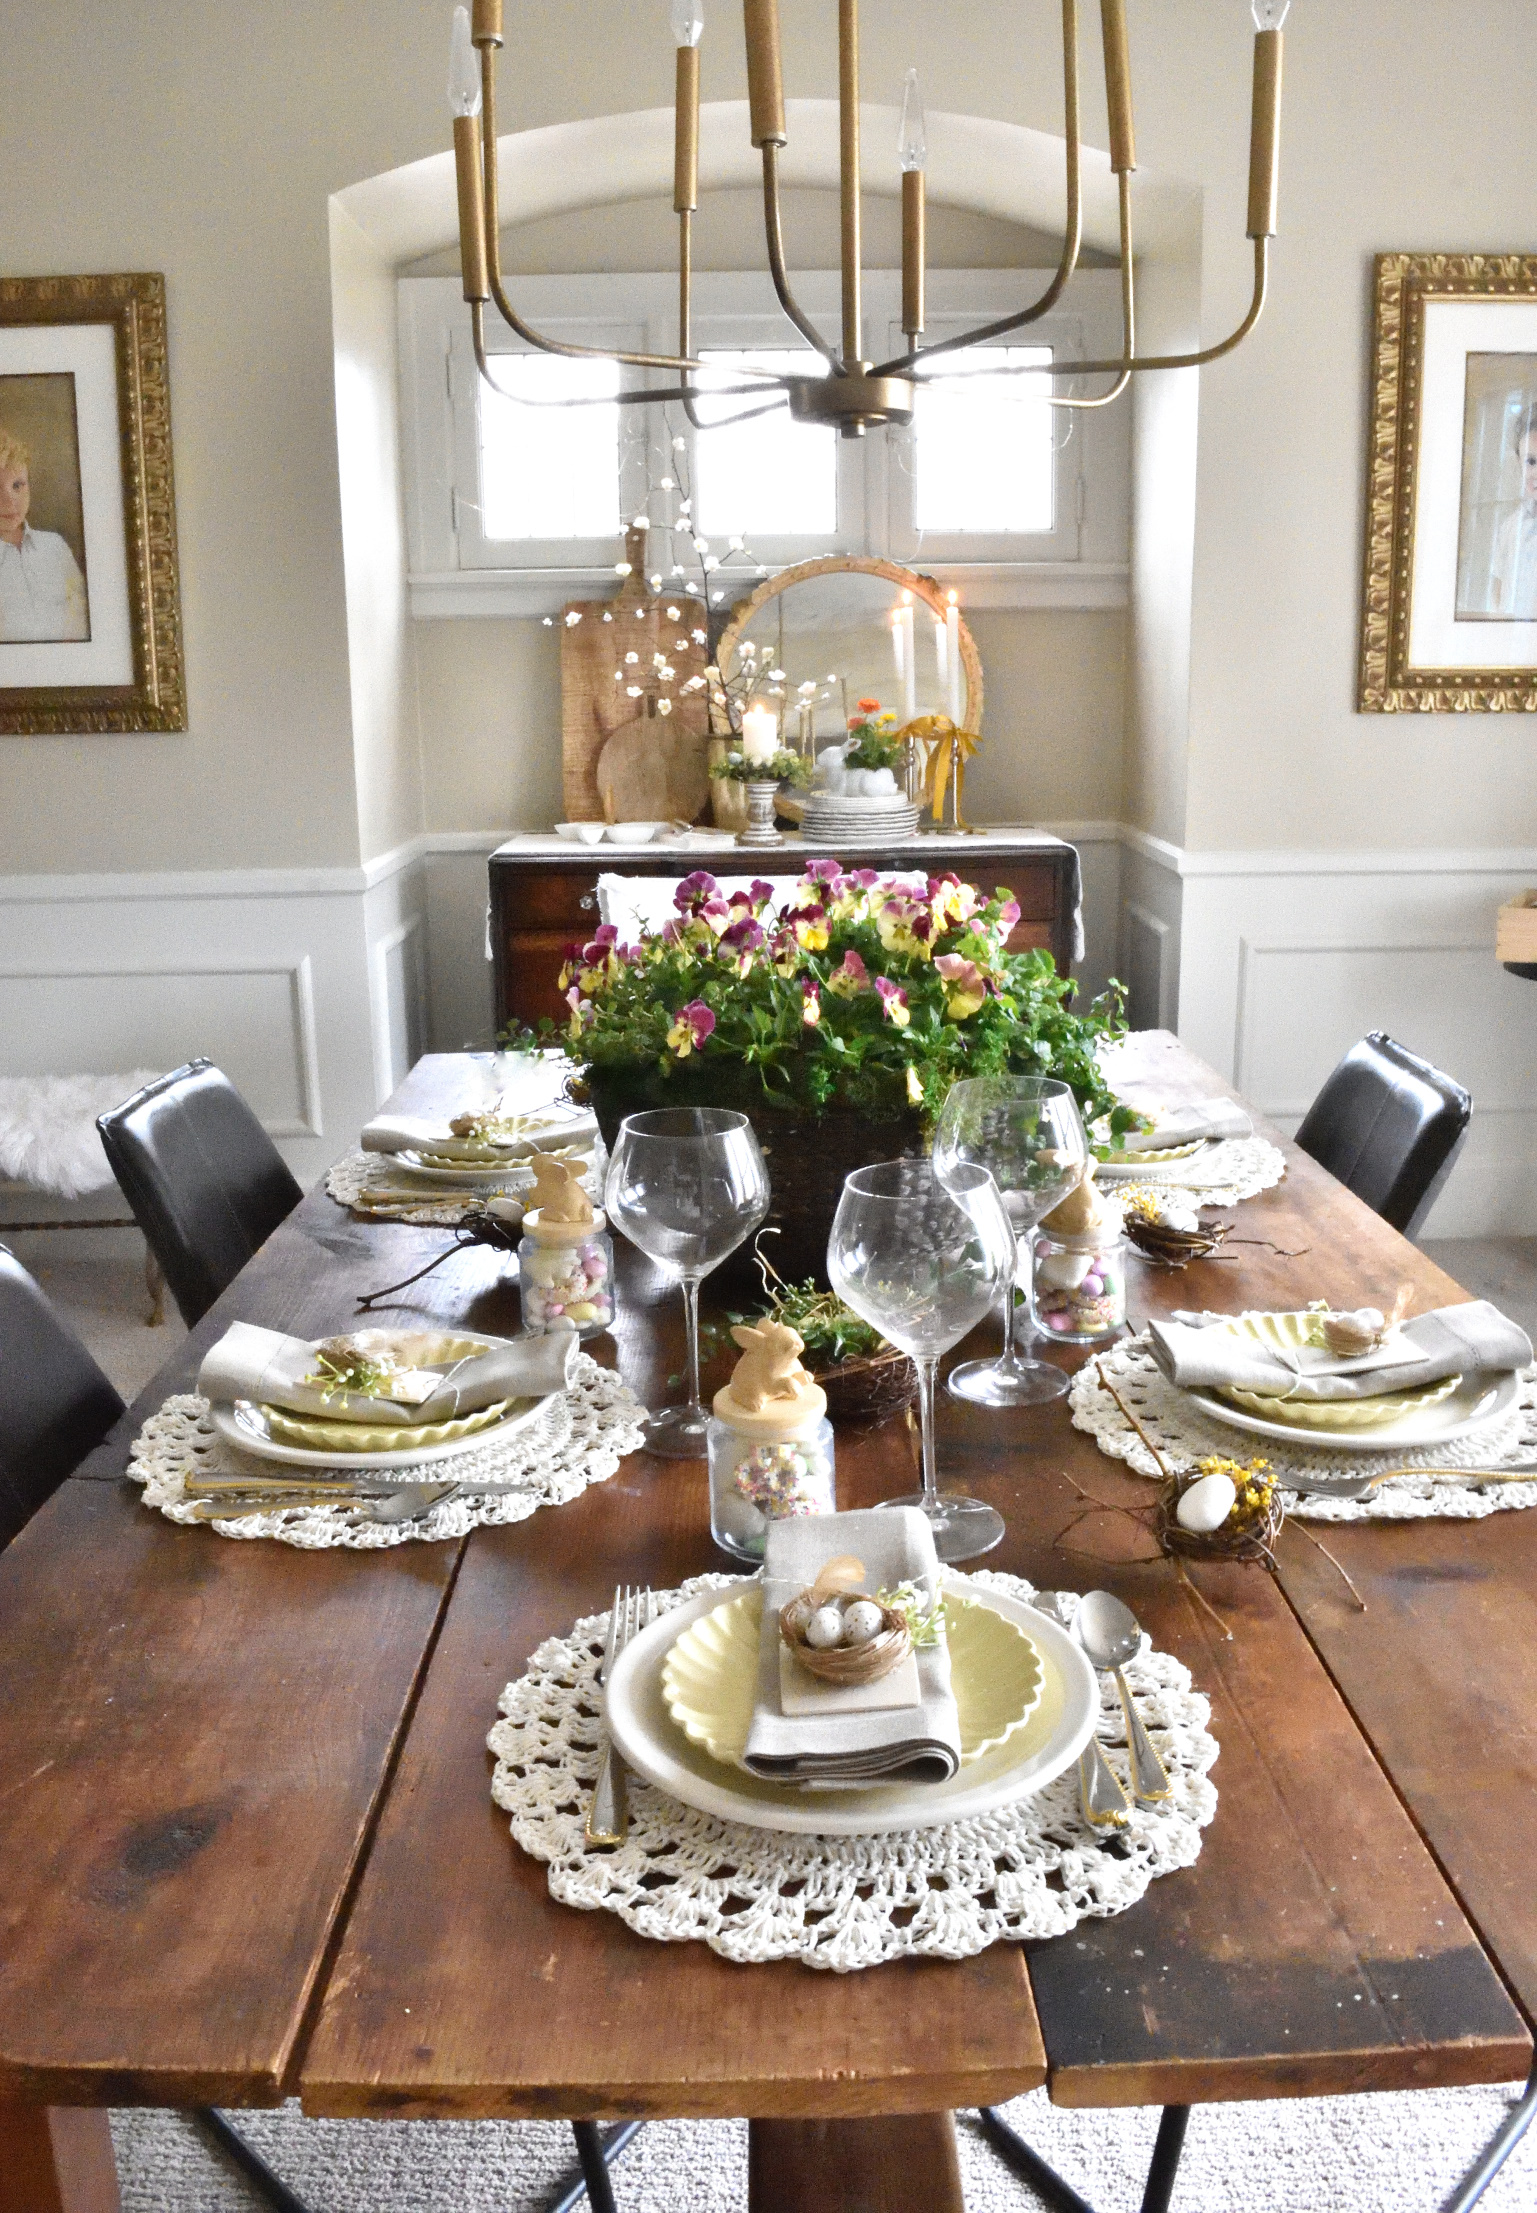 planning a simple Easter table